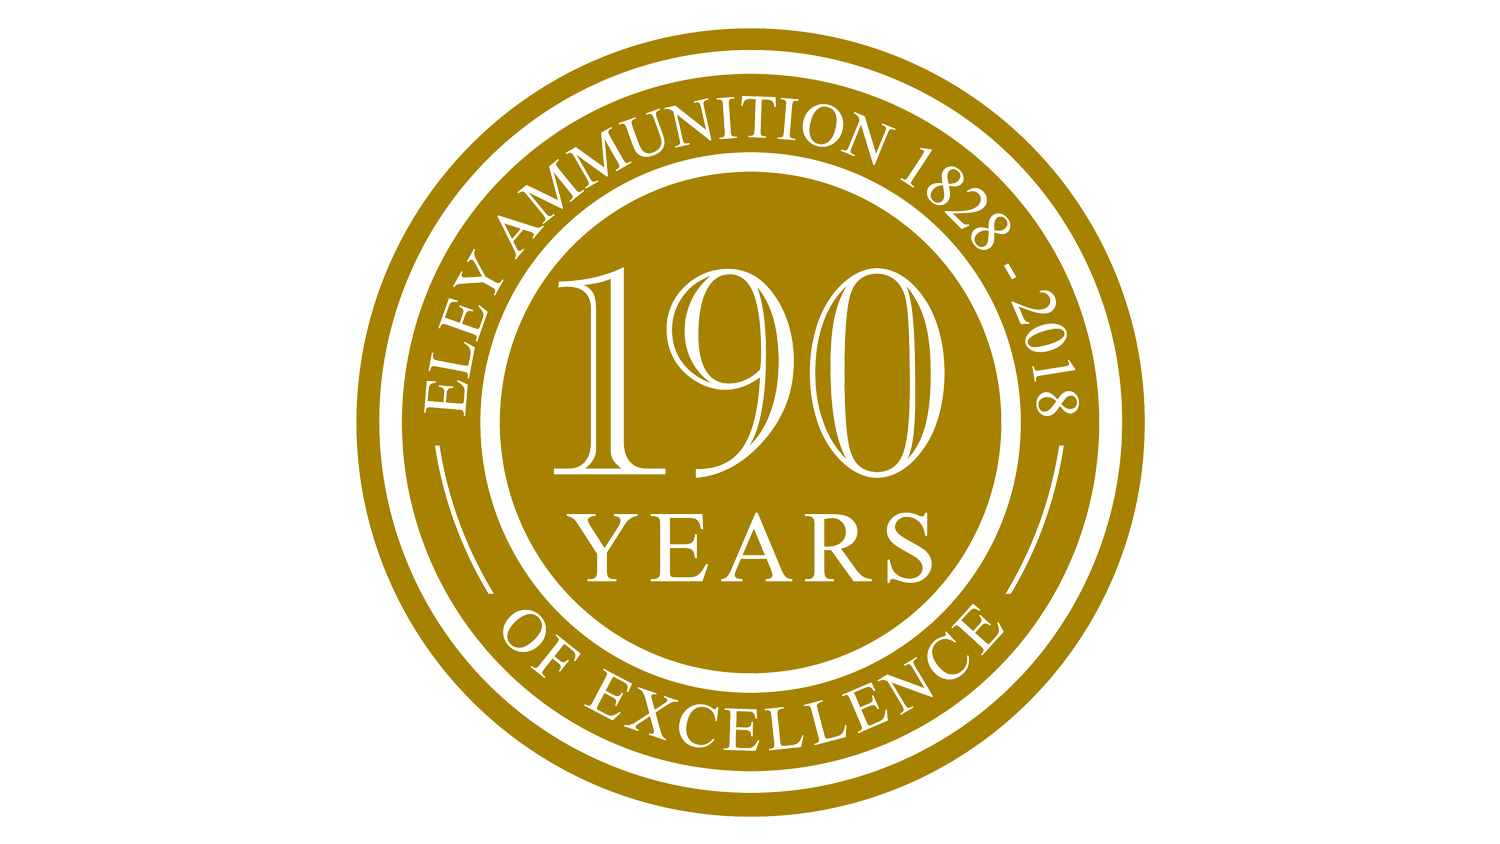 Eley Ammunition | 190 Years of Excellence | 1828-2018